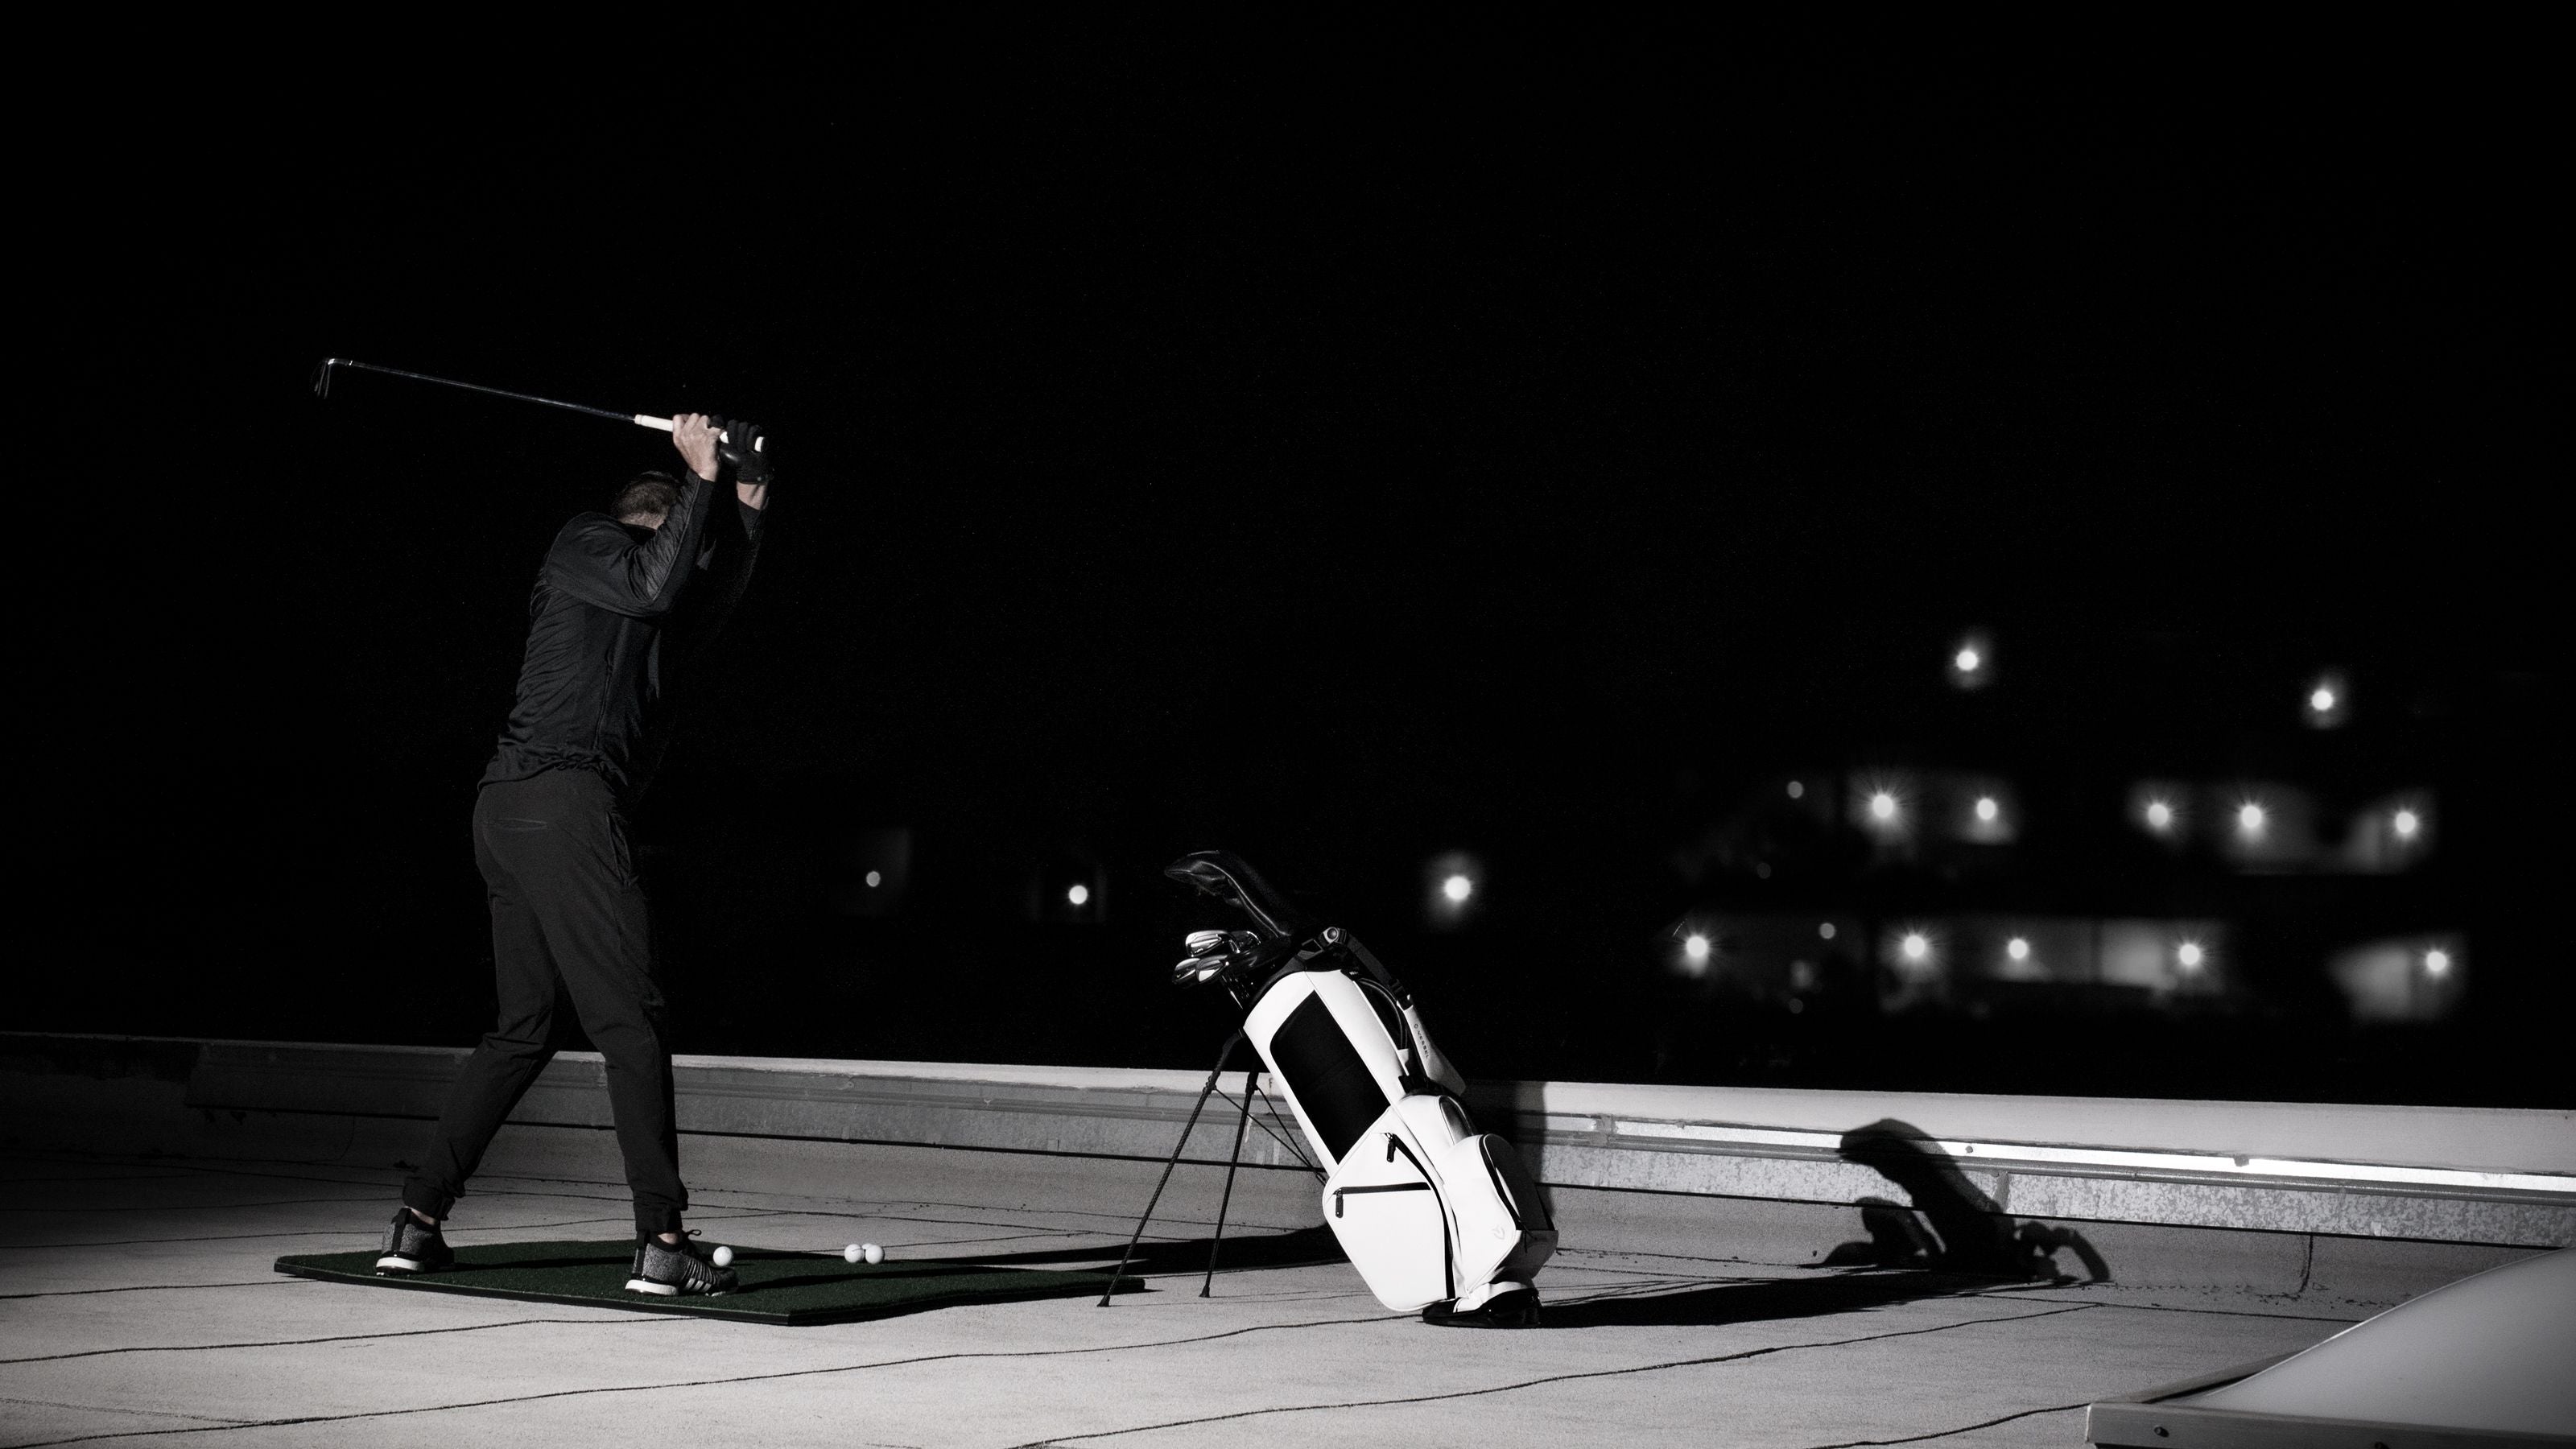 White golf bag is propped up on the ground next to a person playing golf on a roof at night